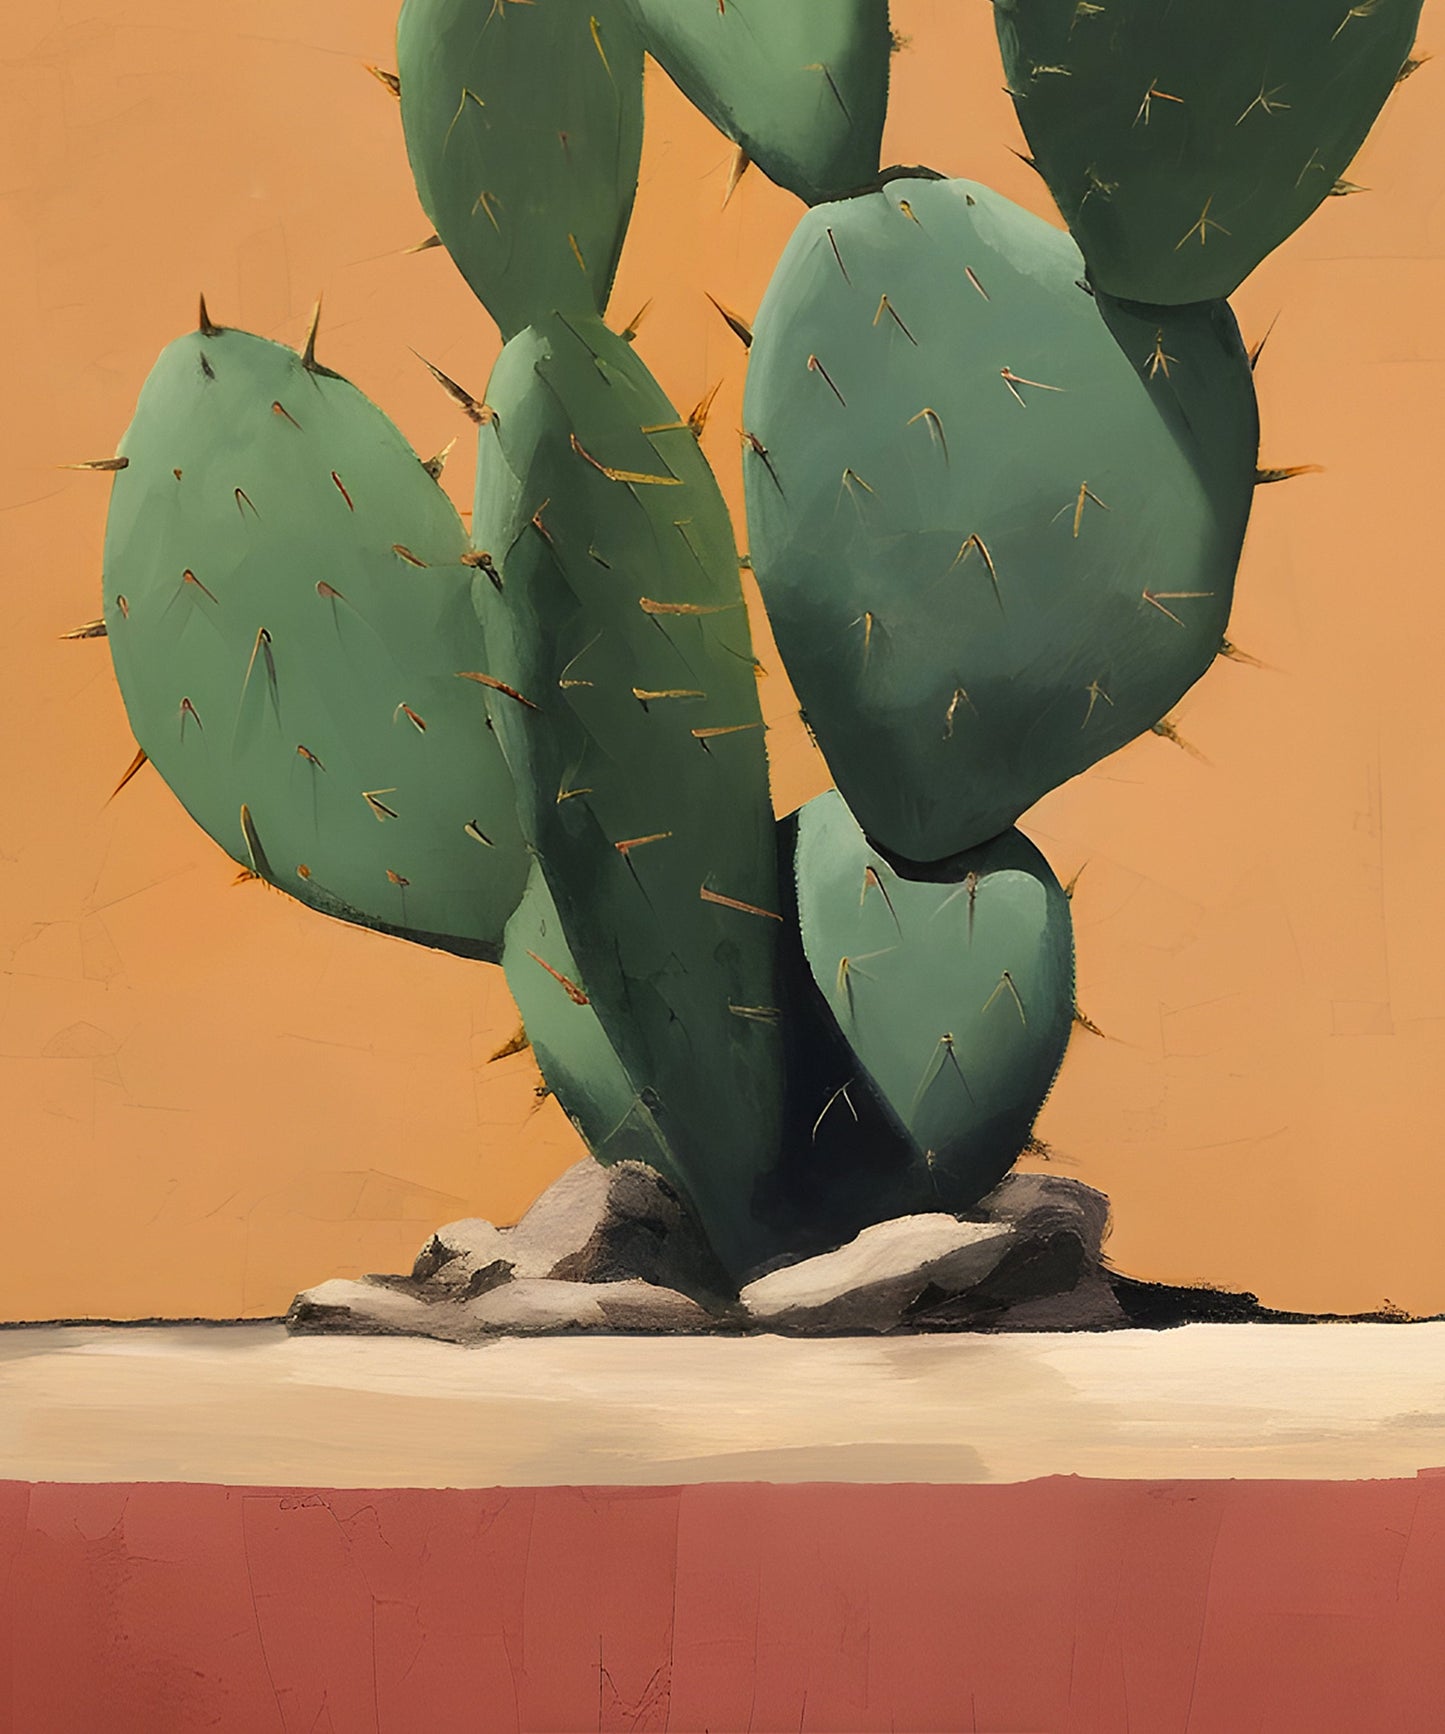 Lone Cacti #3 of 3 - Prickly Pear